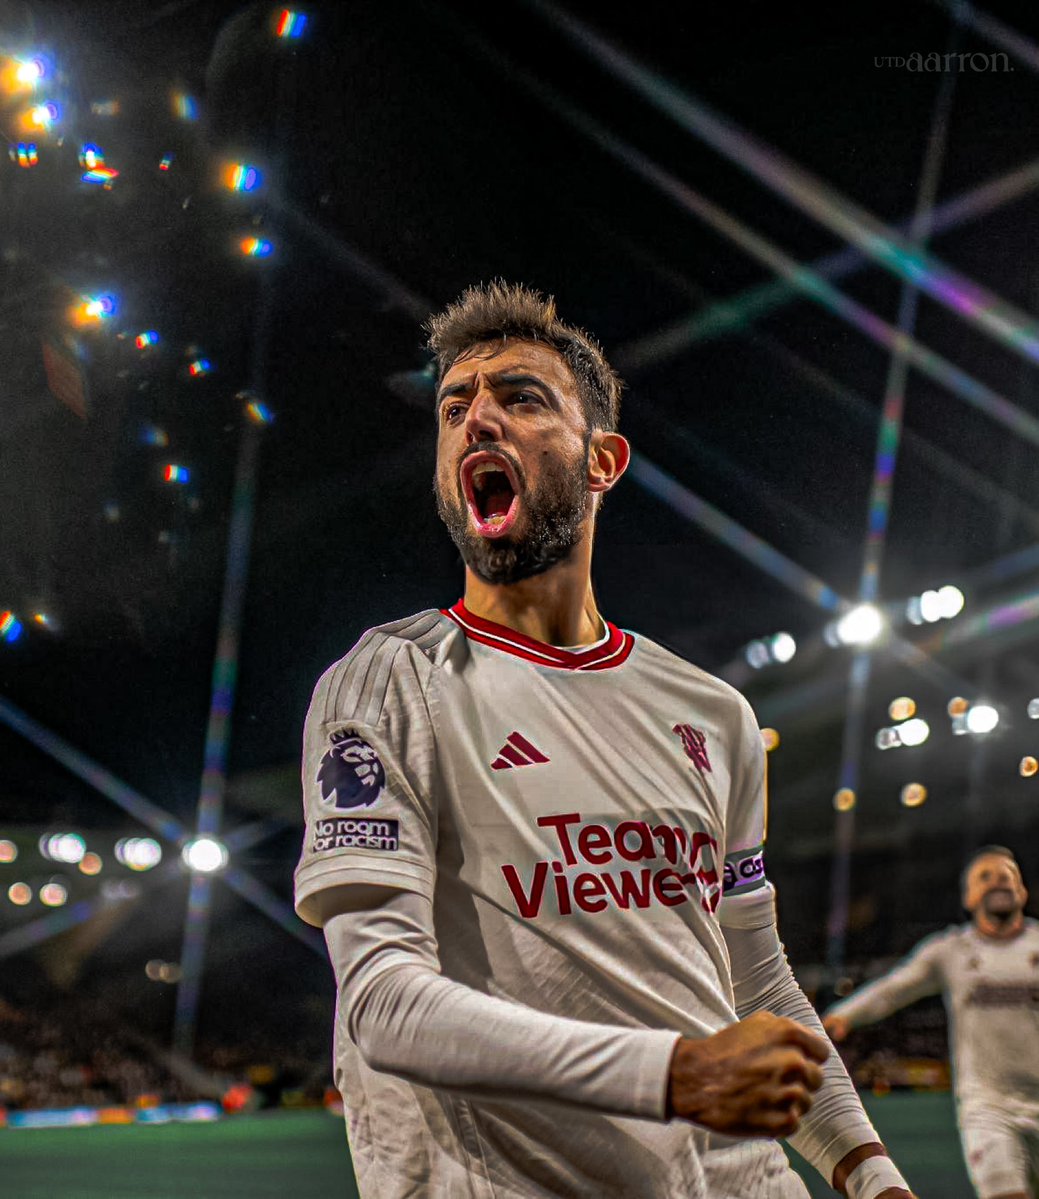 Bruno Fernandes wants to help Manchester United win trophies. His idea is to continue with the club and fight for the badge. He feels really good at the club with Ineos. #mufc #mujournal [@FabrizioRomano]